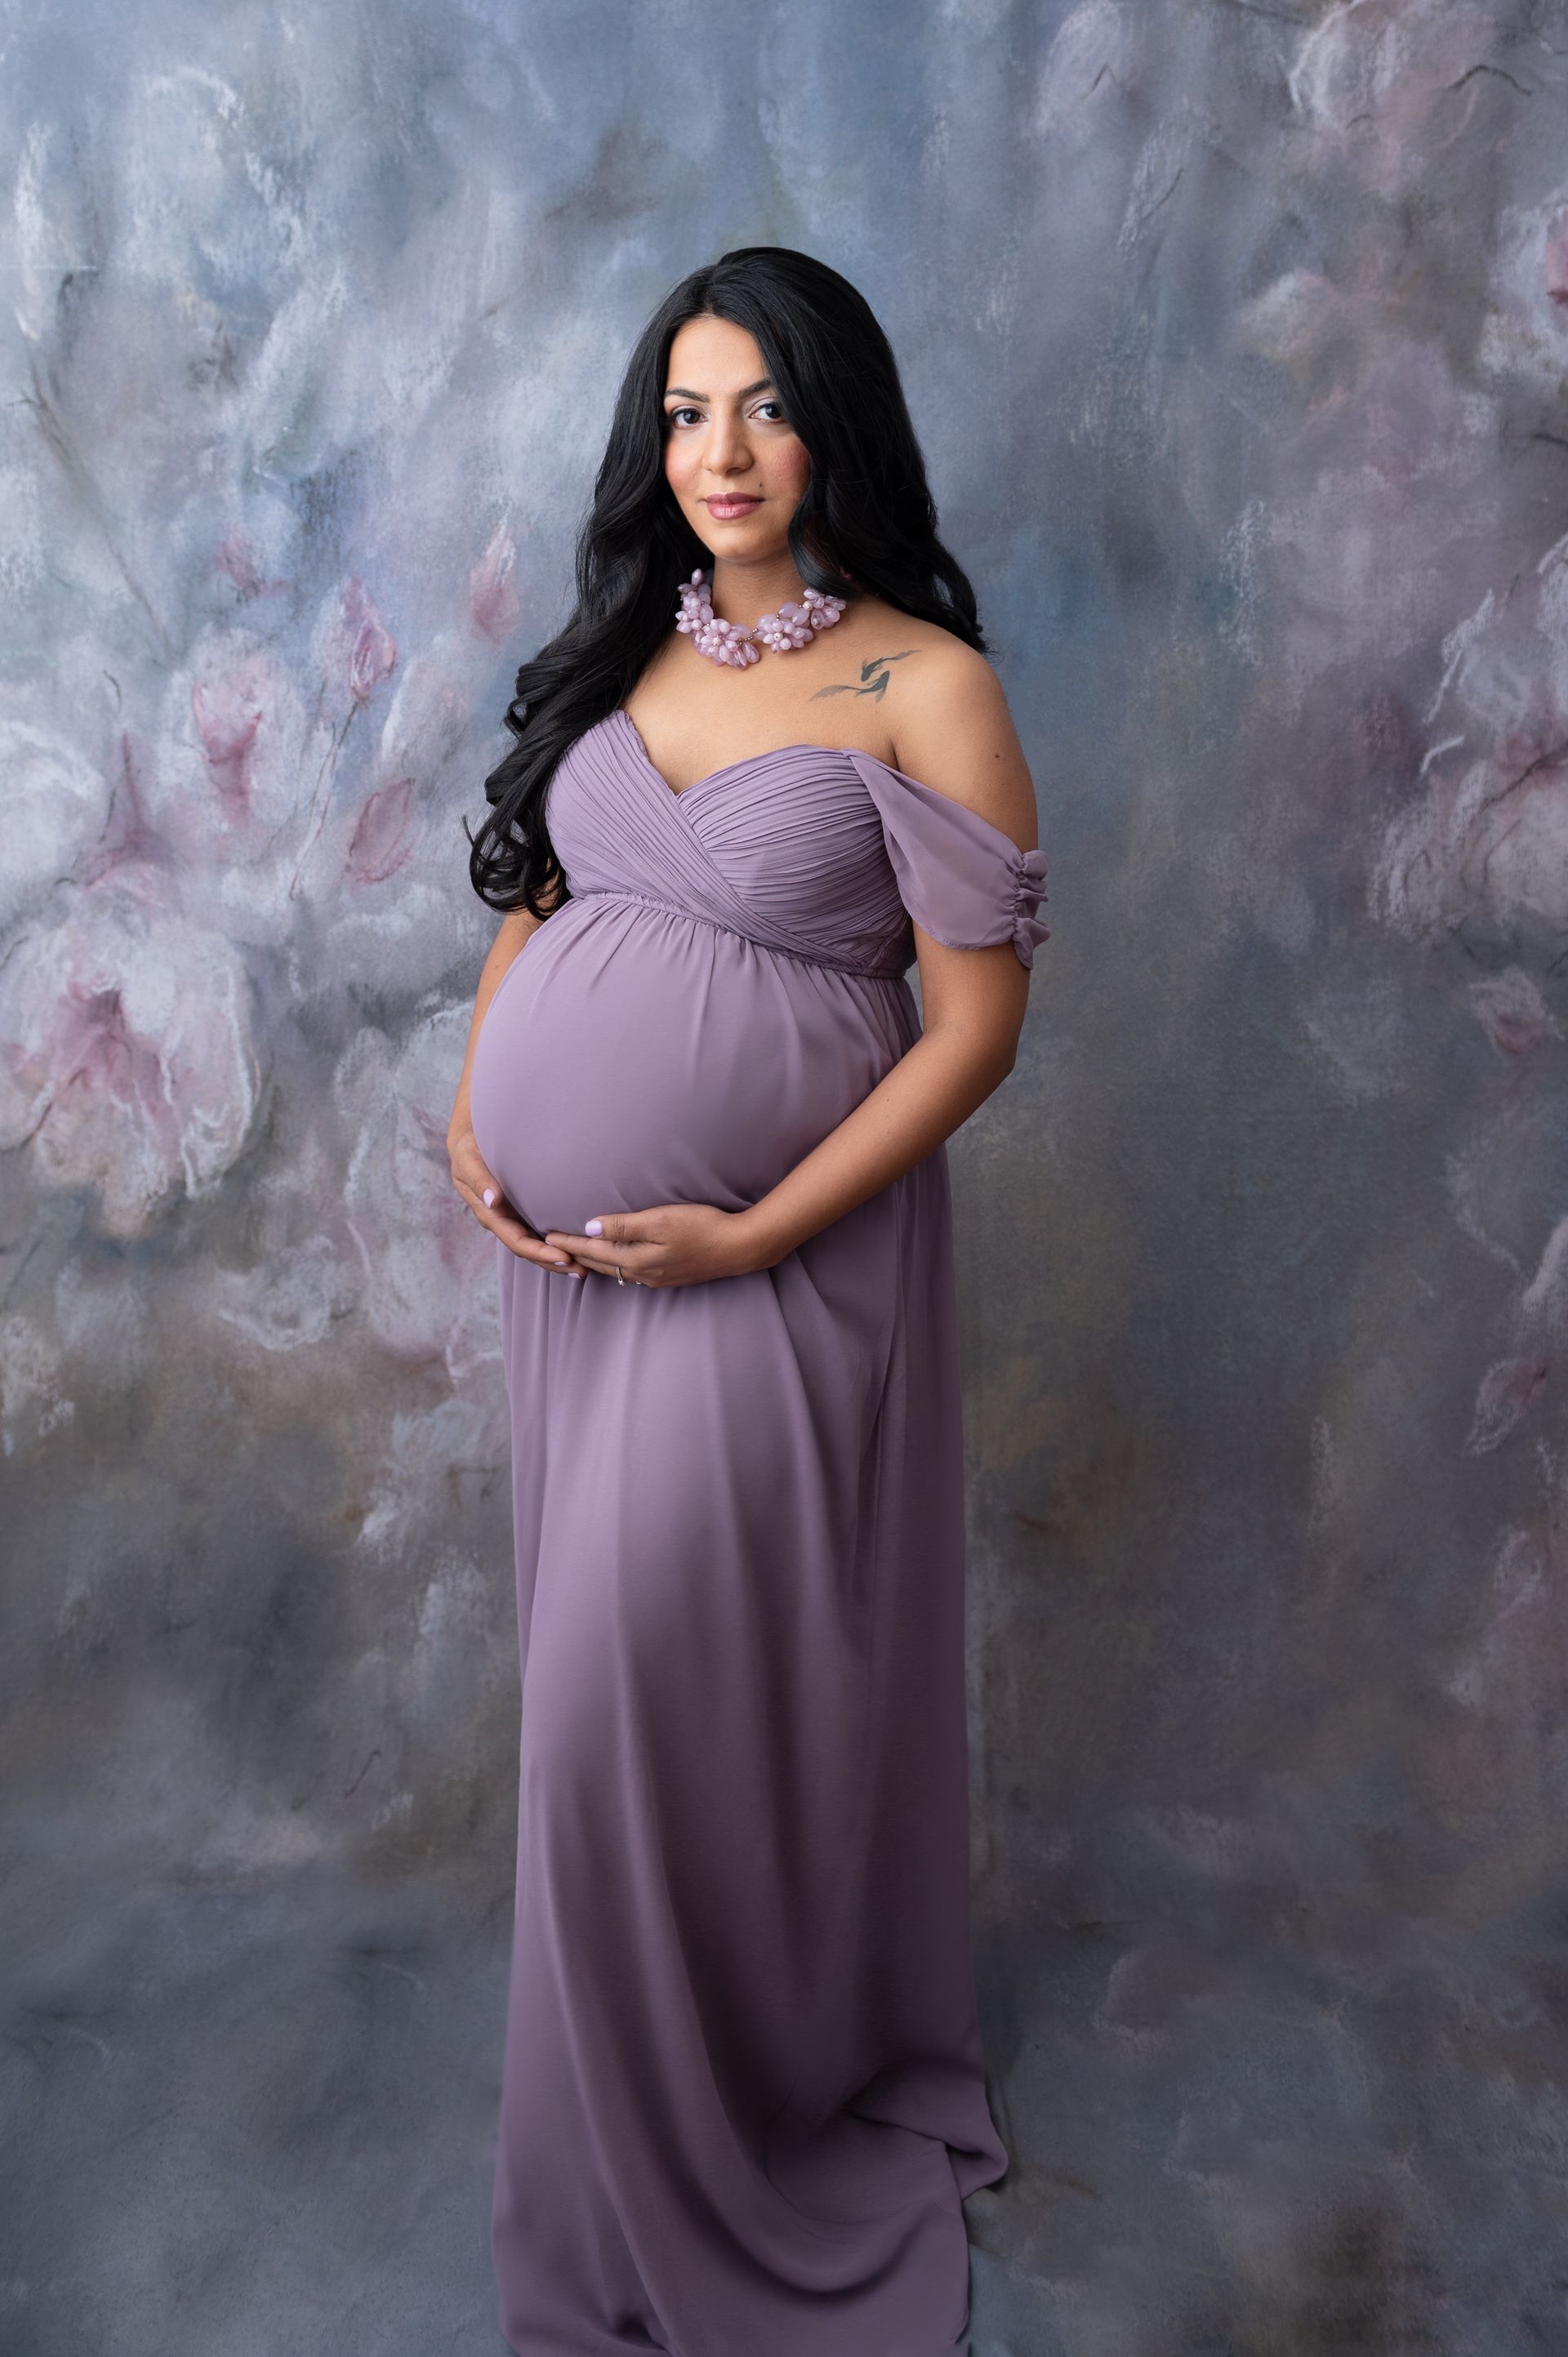 a pregnant woman in a purple dress is standing in front of a floral background .